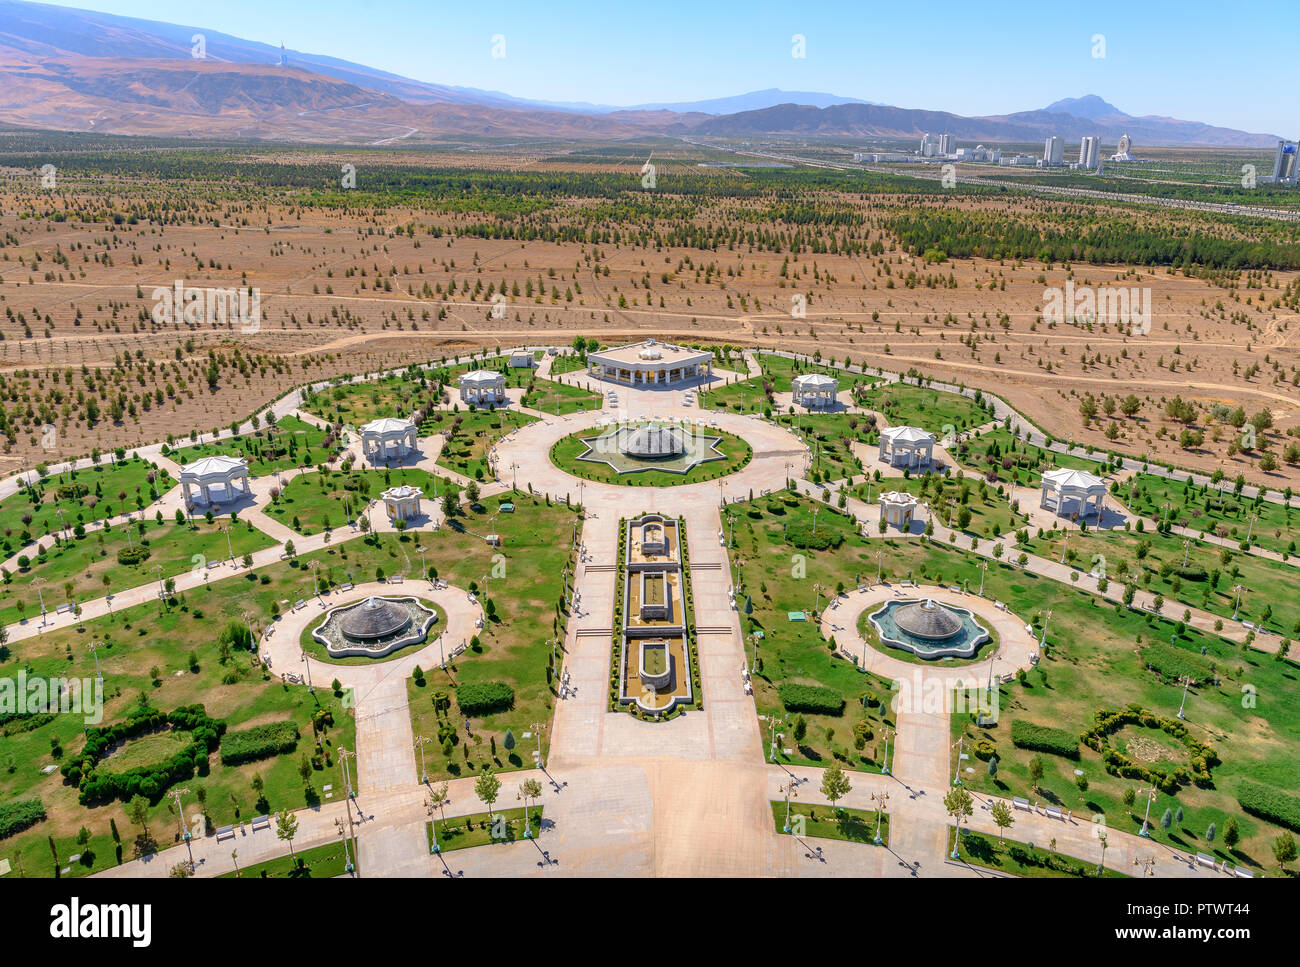 Ashgabat Turkmenistan city scape, skyline of beautiful architecture and parks in Ashgabat the capital city of Turkmenistan in Central Asia. Stock Photo